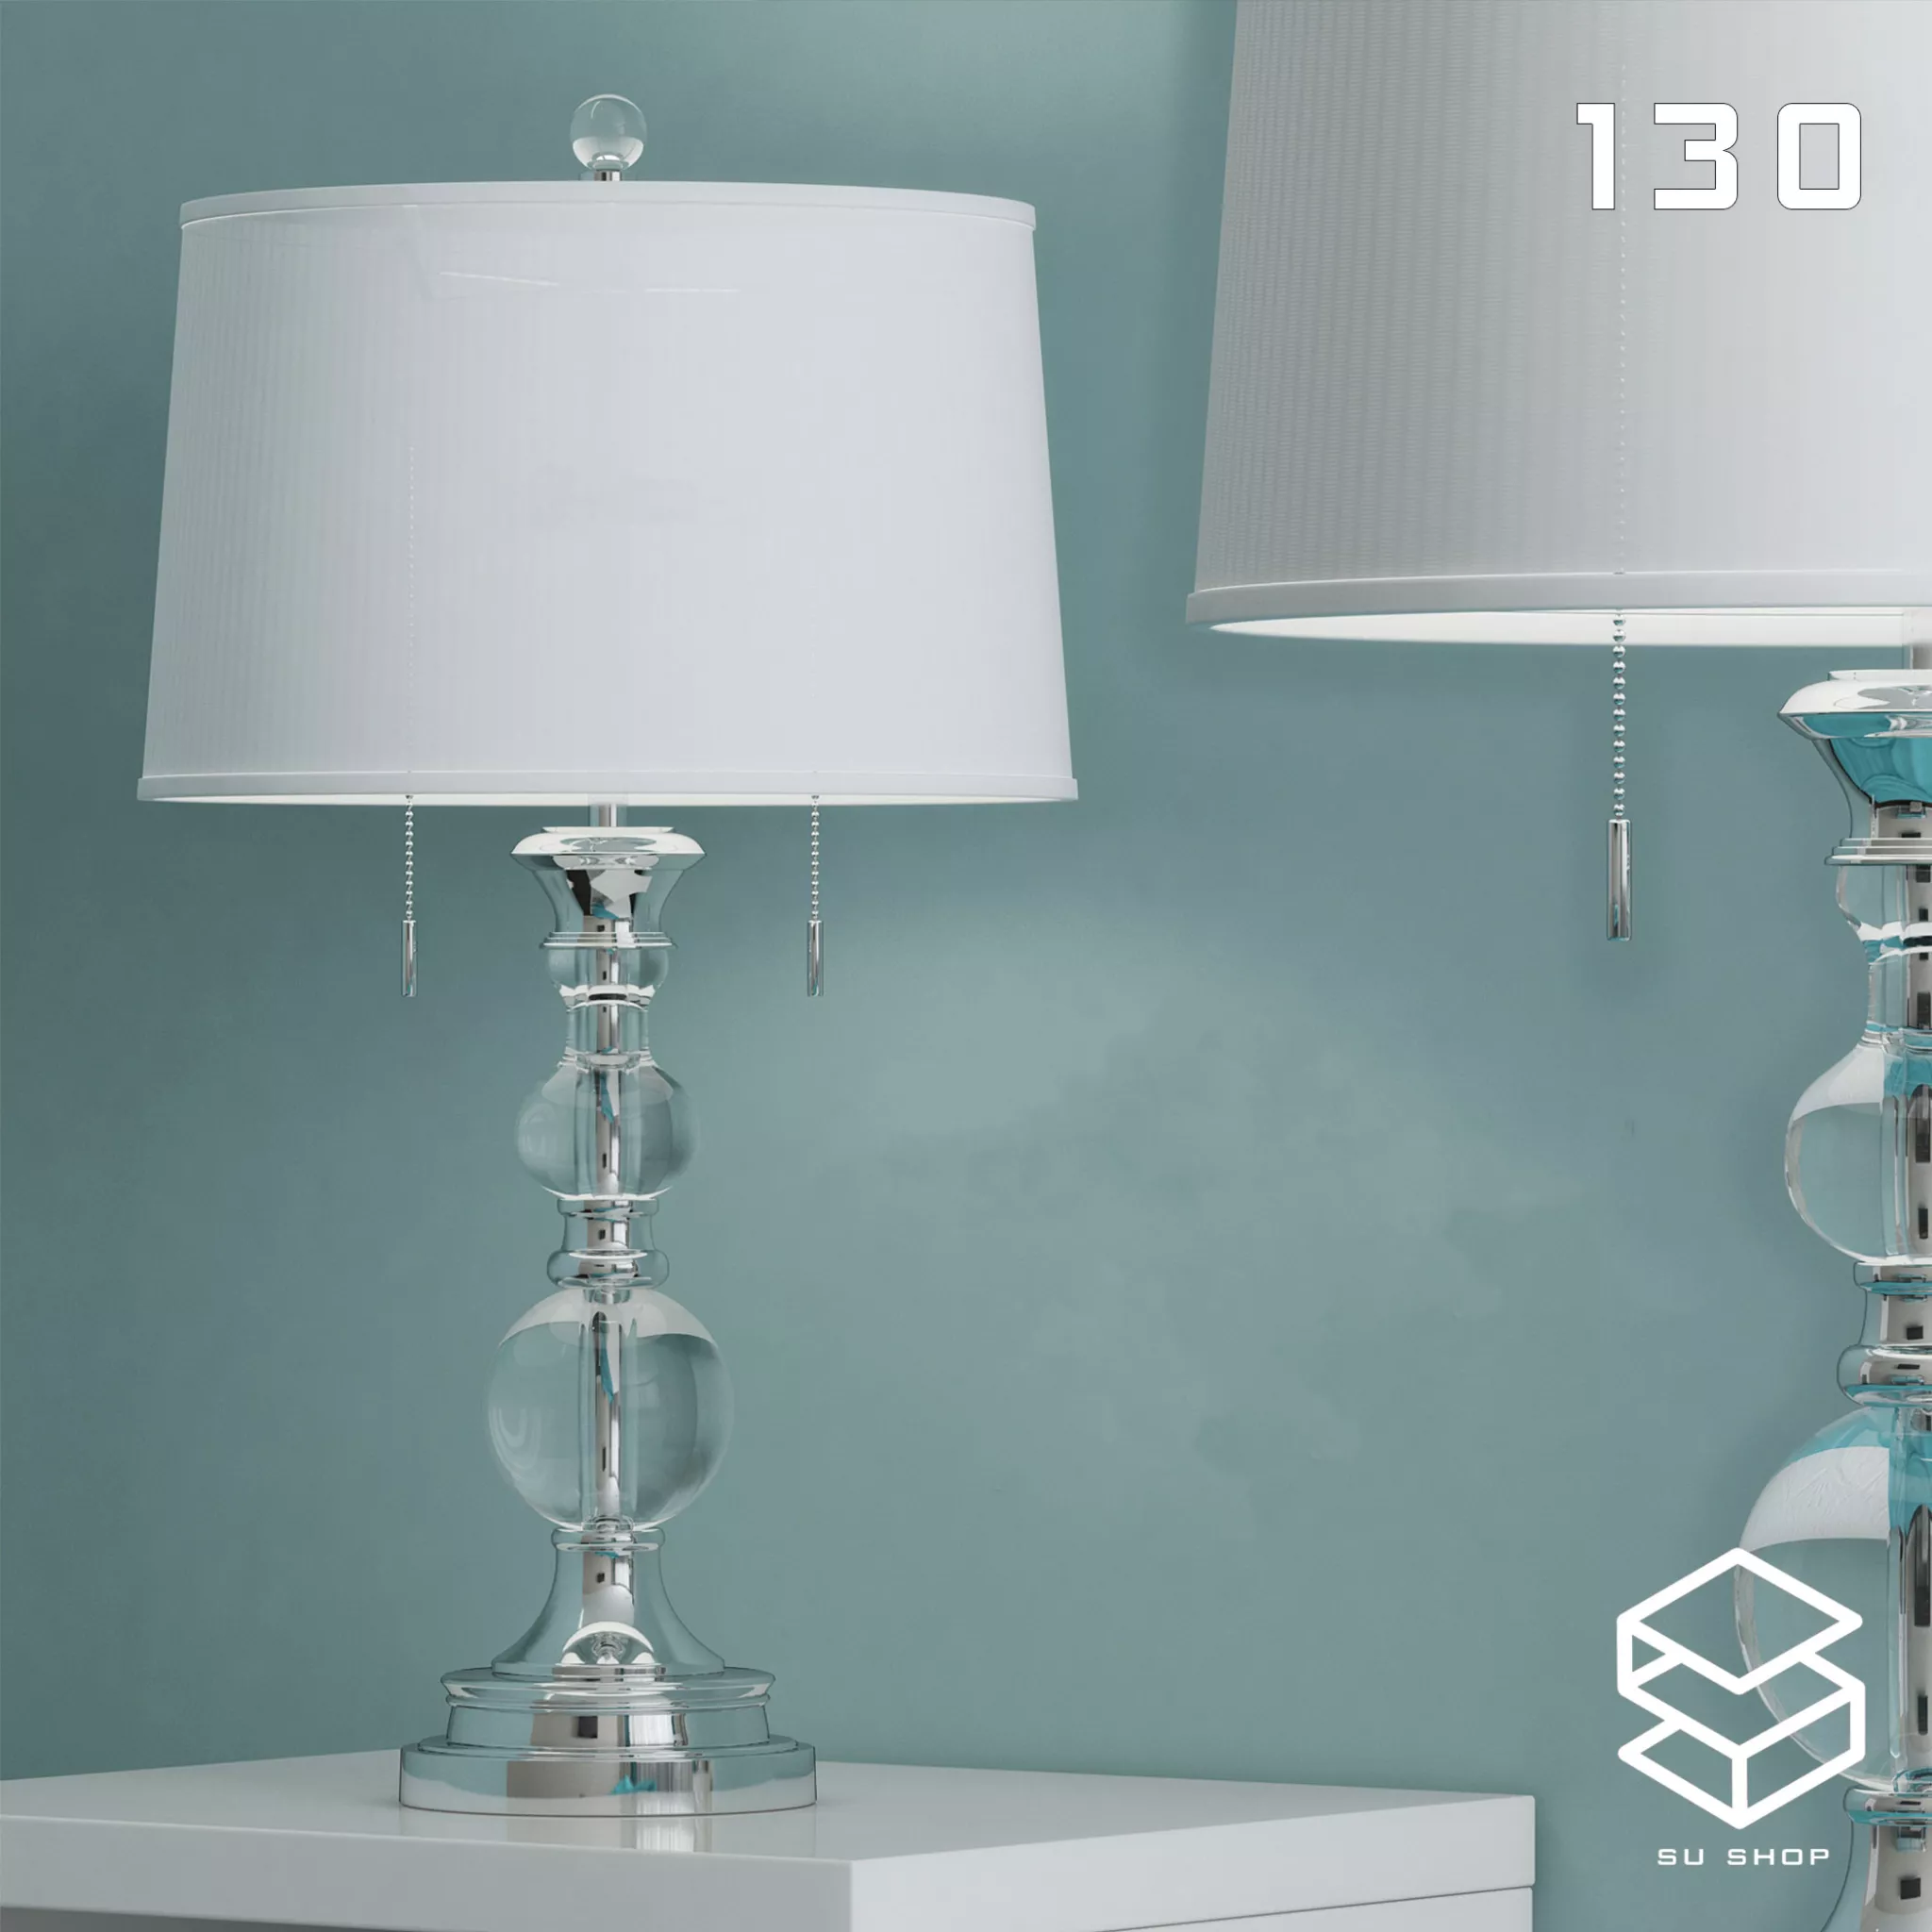 MODERN TABLE LAMP - SKETCHUP 3D MODEL - VRAY OR ENSCAPE - ID14698